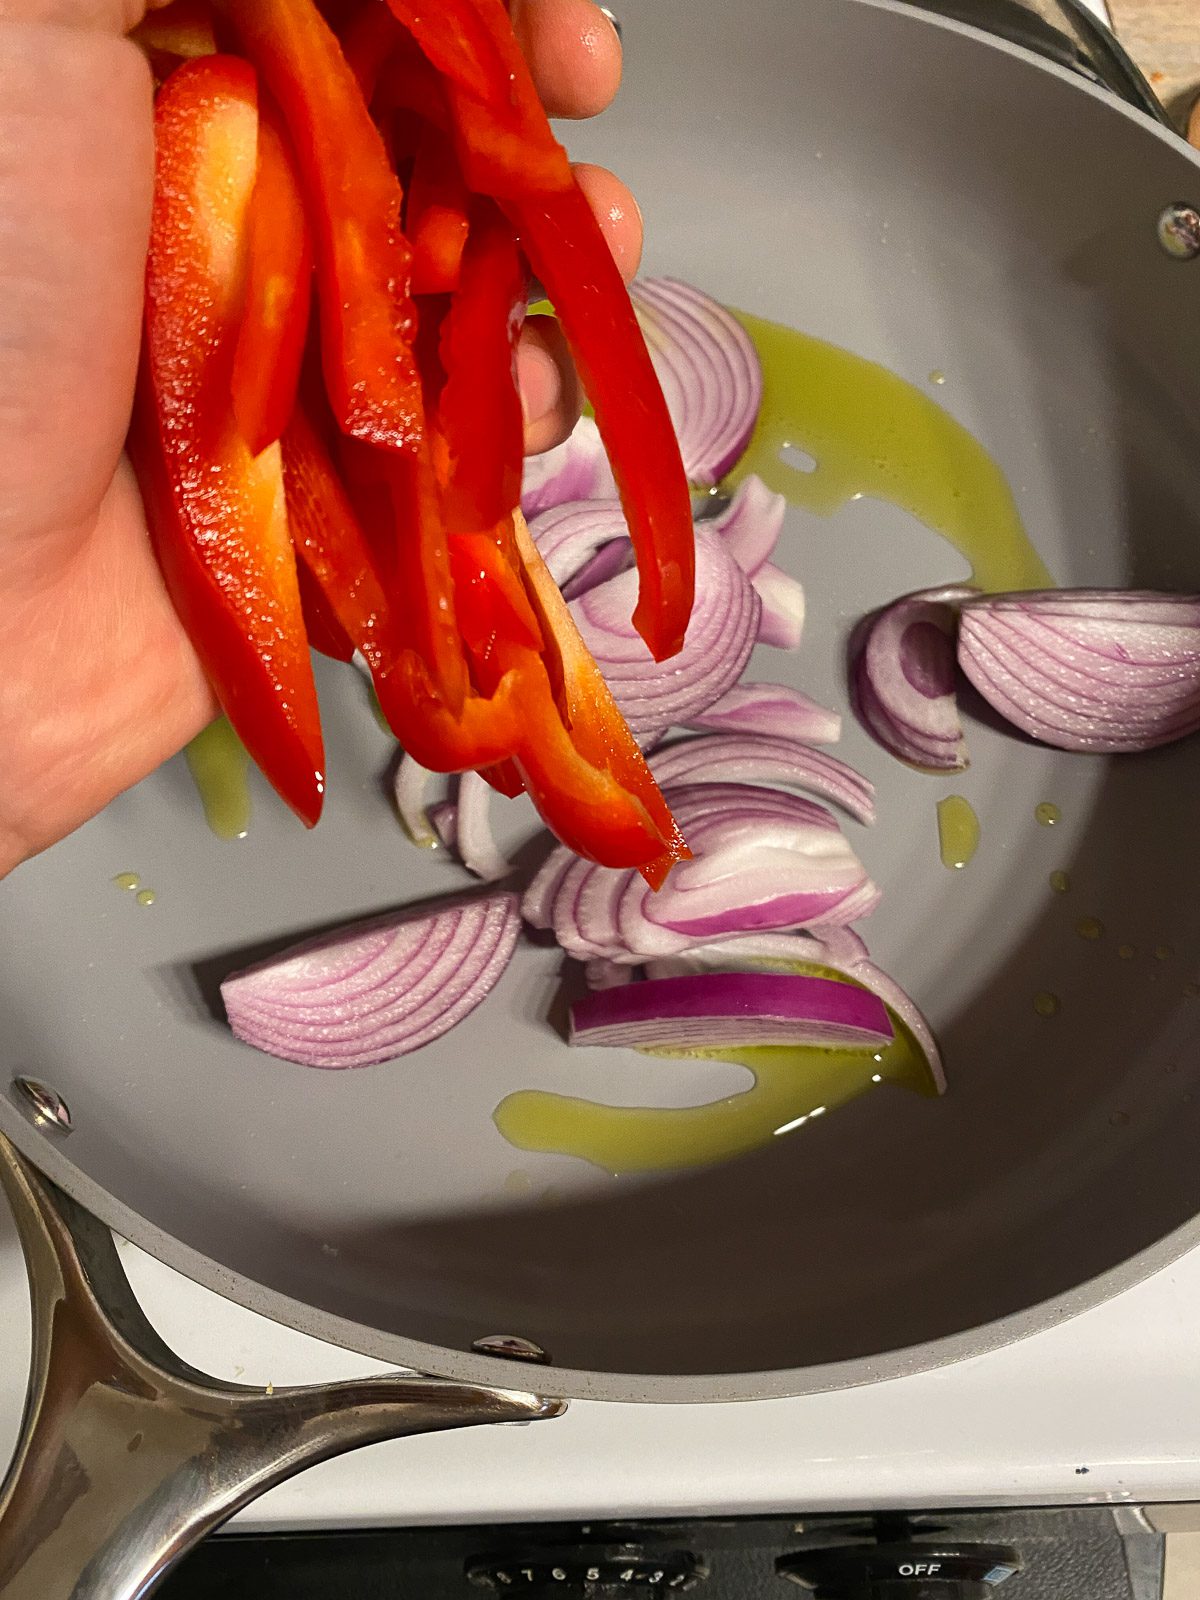 process of adding red peppers to skillet